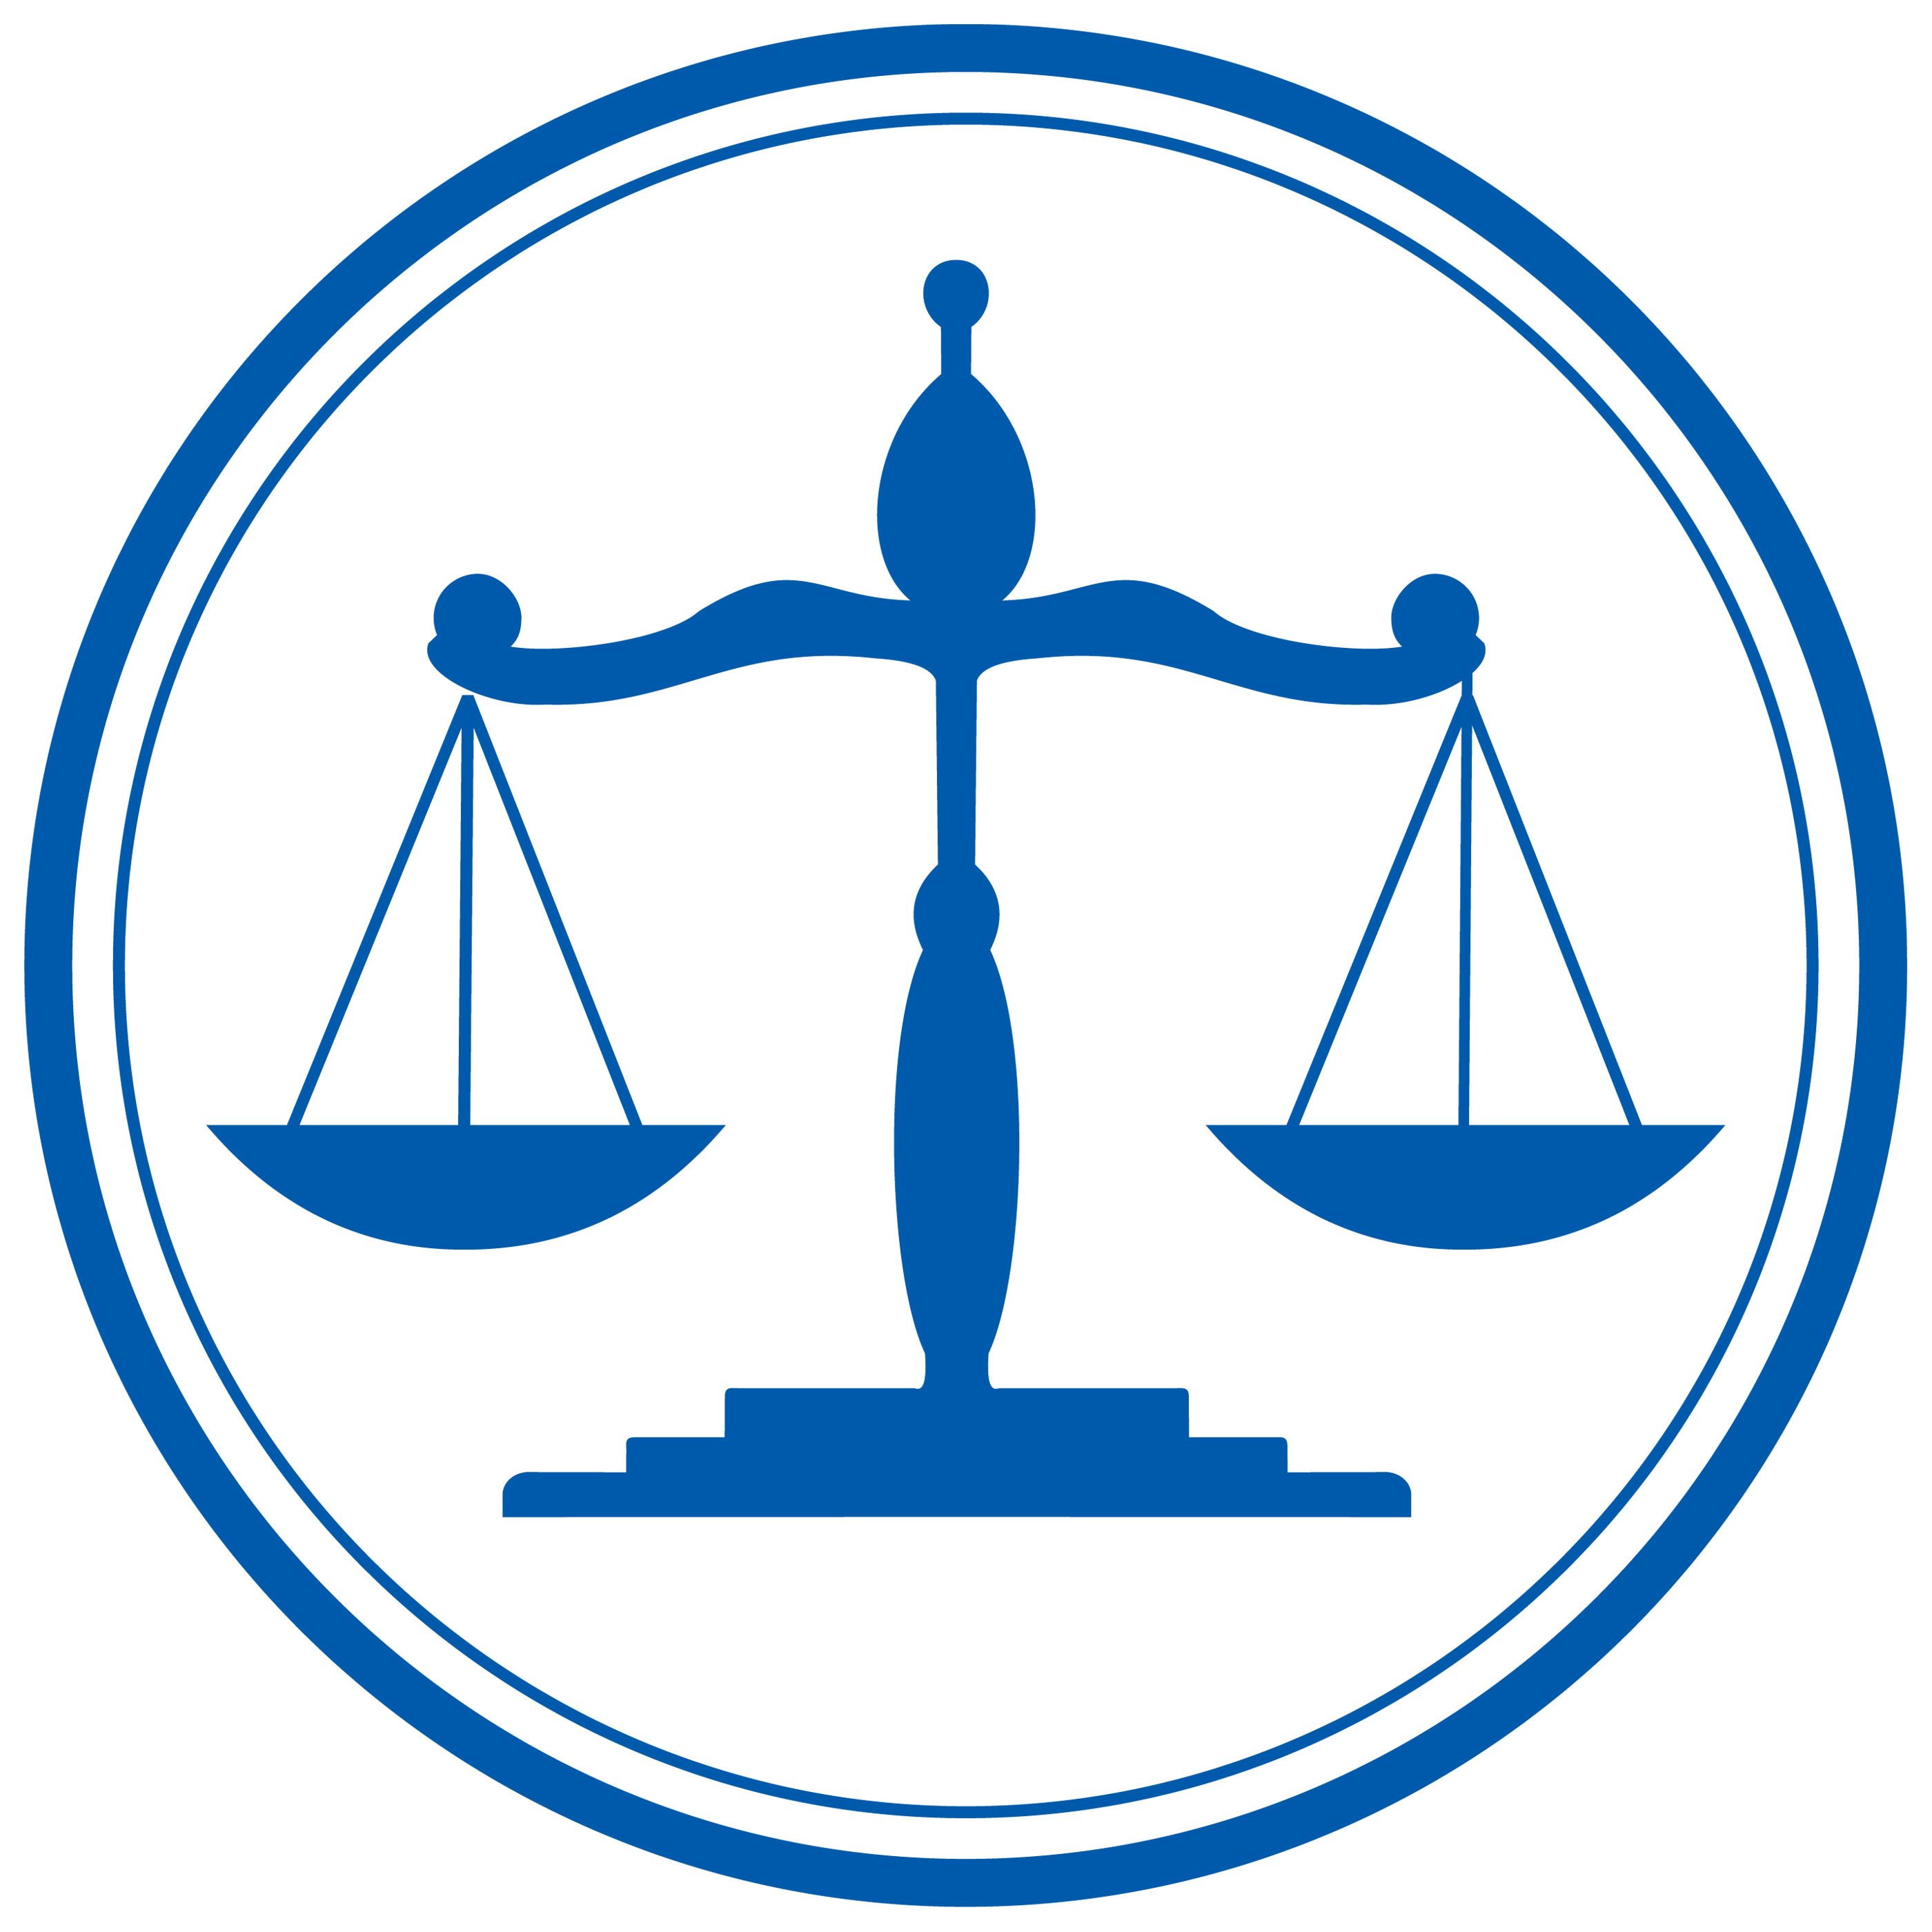 Lawyer scales of justice clip art